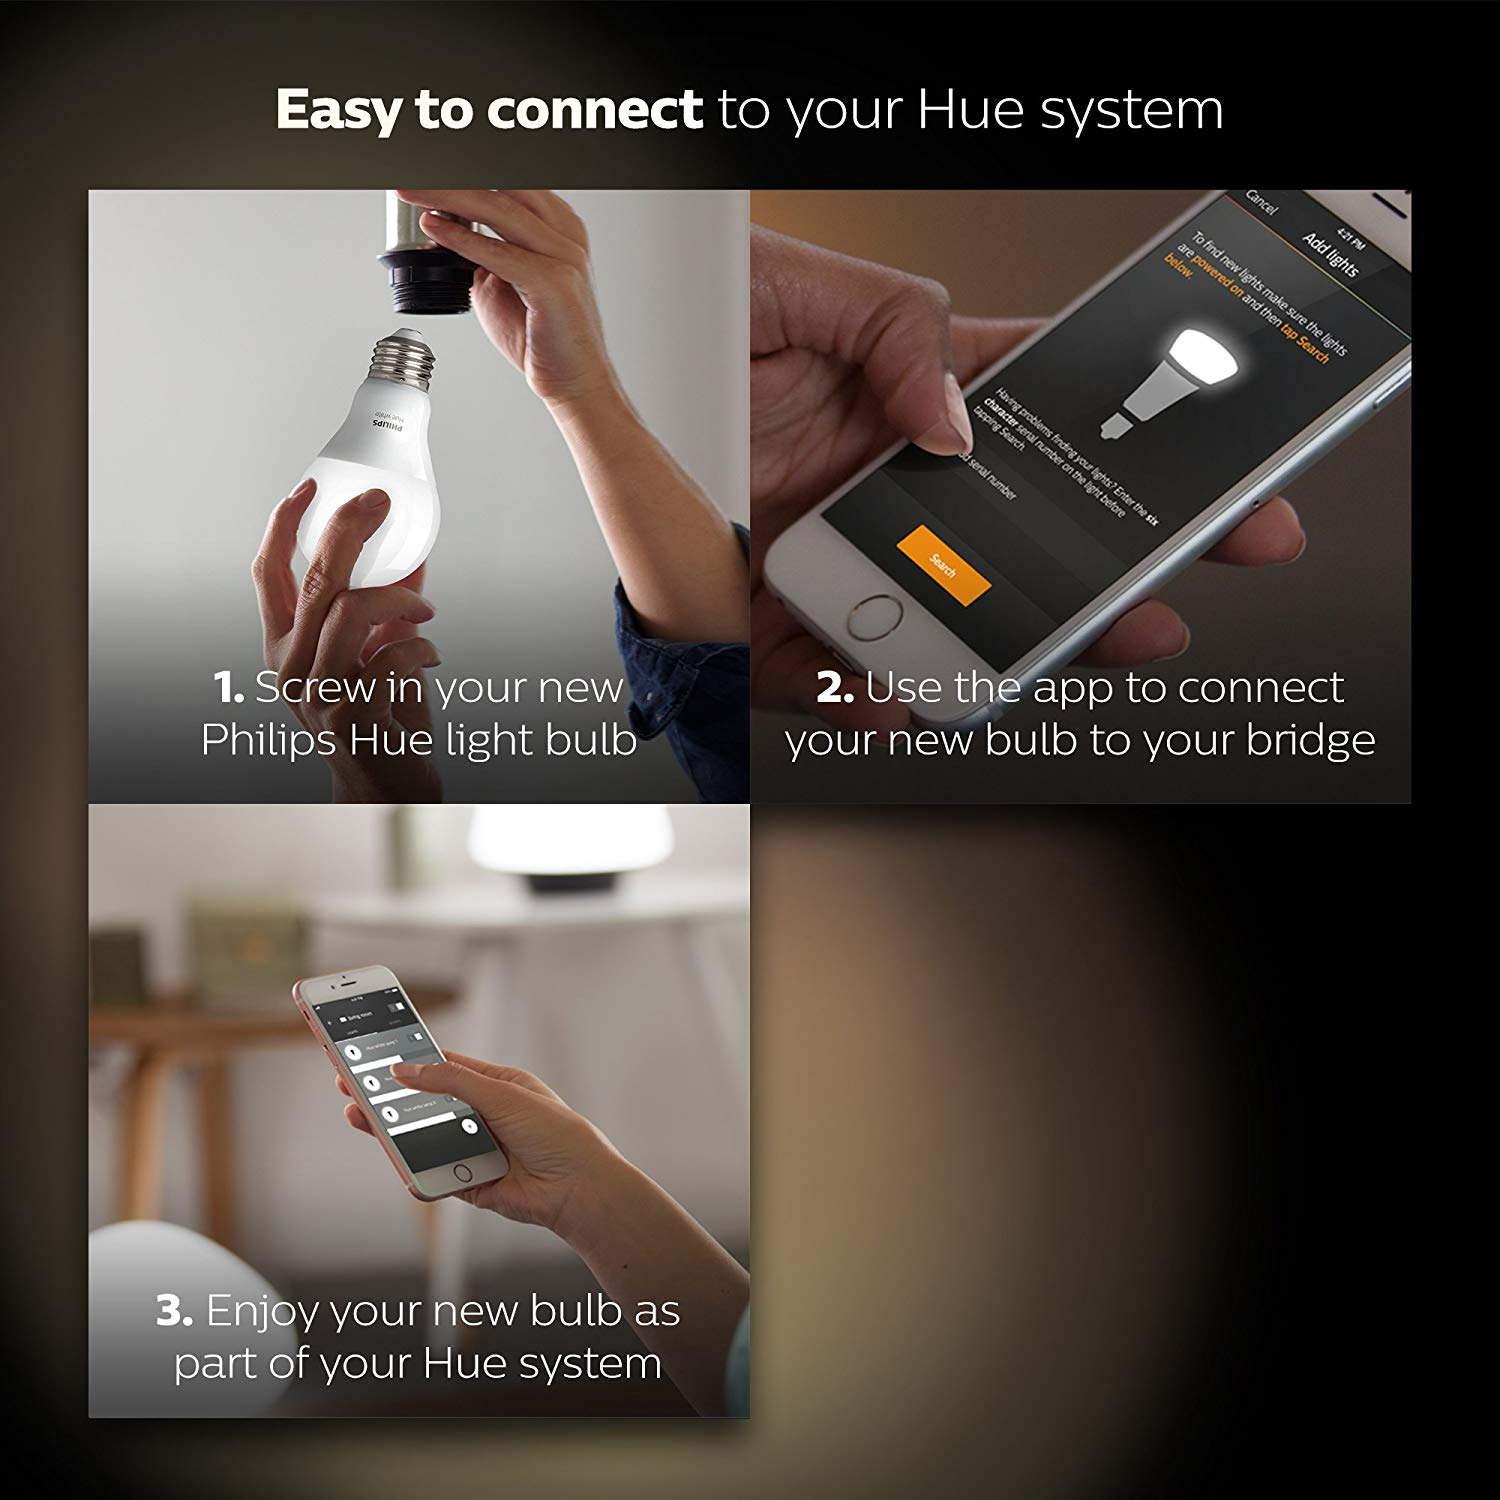 Philips Hue - Easy to connect to your Hue system 1. Screw in your new Philips Hue light bulb 2. Use the app to connect your new bulb to your bridge 3. Enjoy your new bulb as part of your Hue system